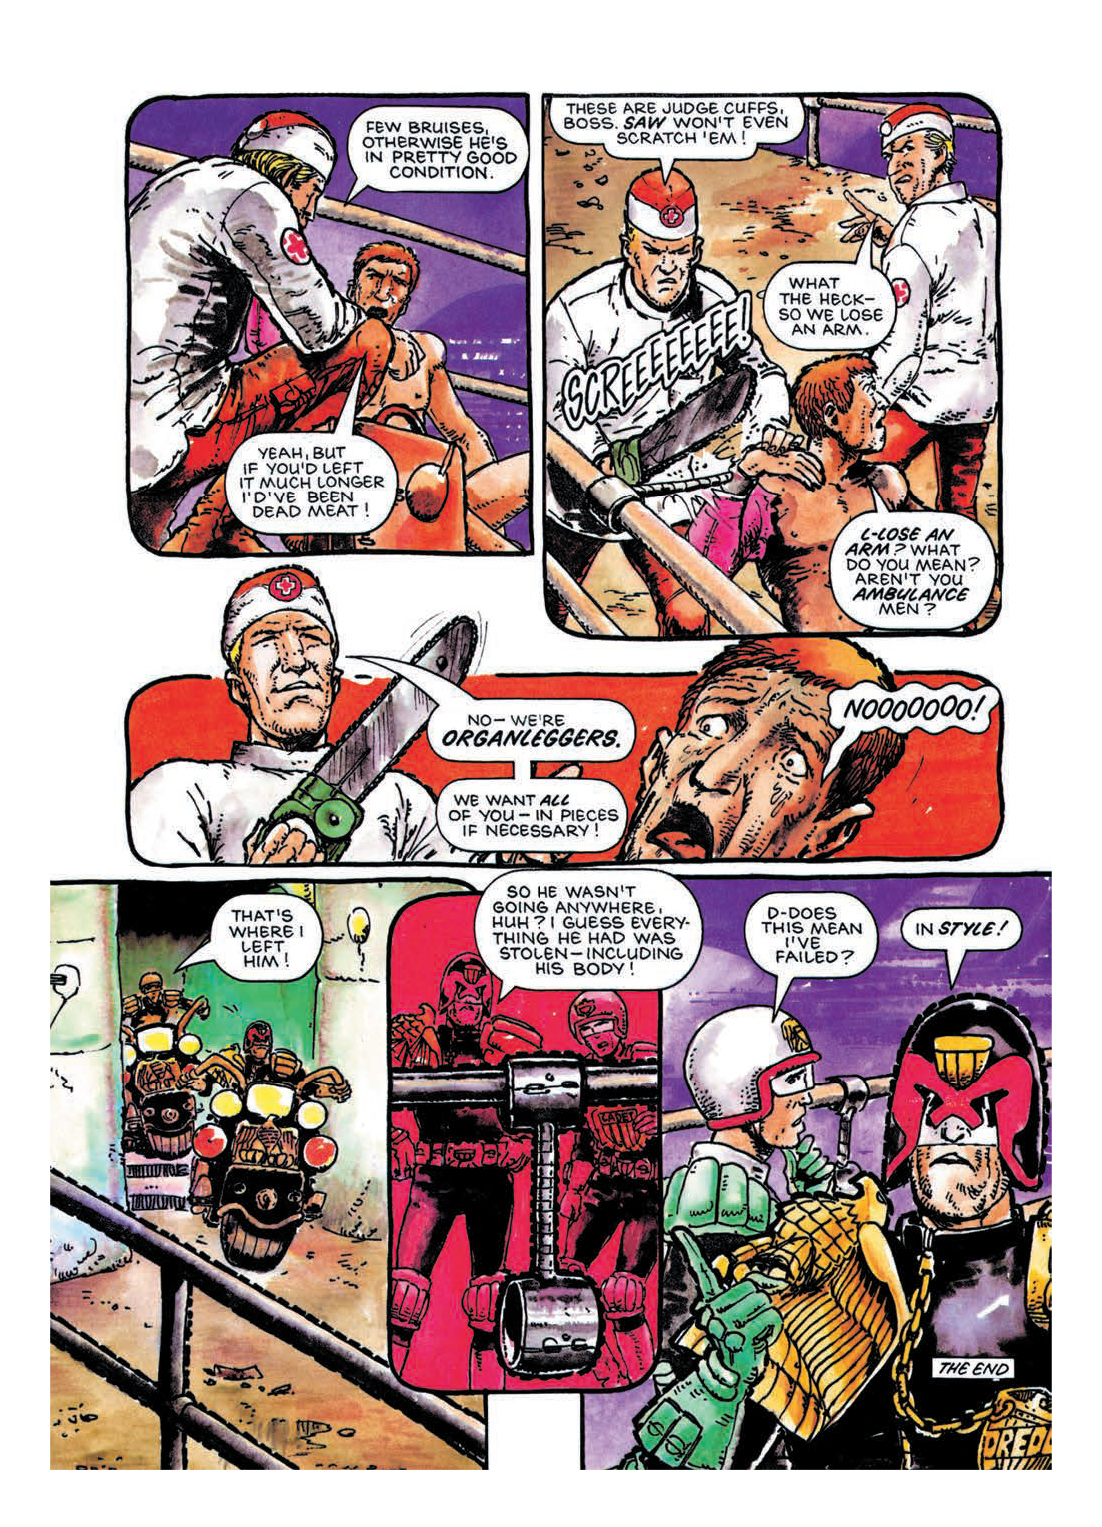 Read online Judge Dredd: The Restricted Files comic -  Issue # TPB 2 - 29